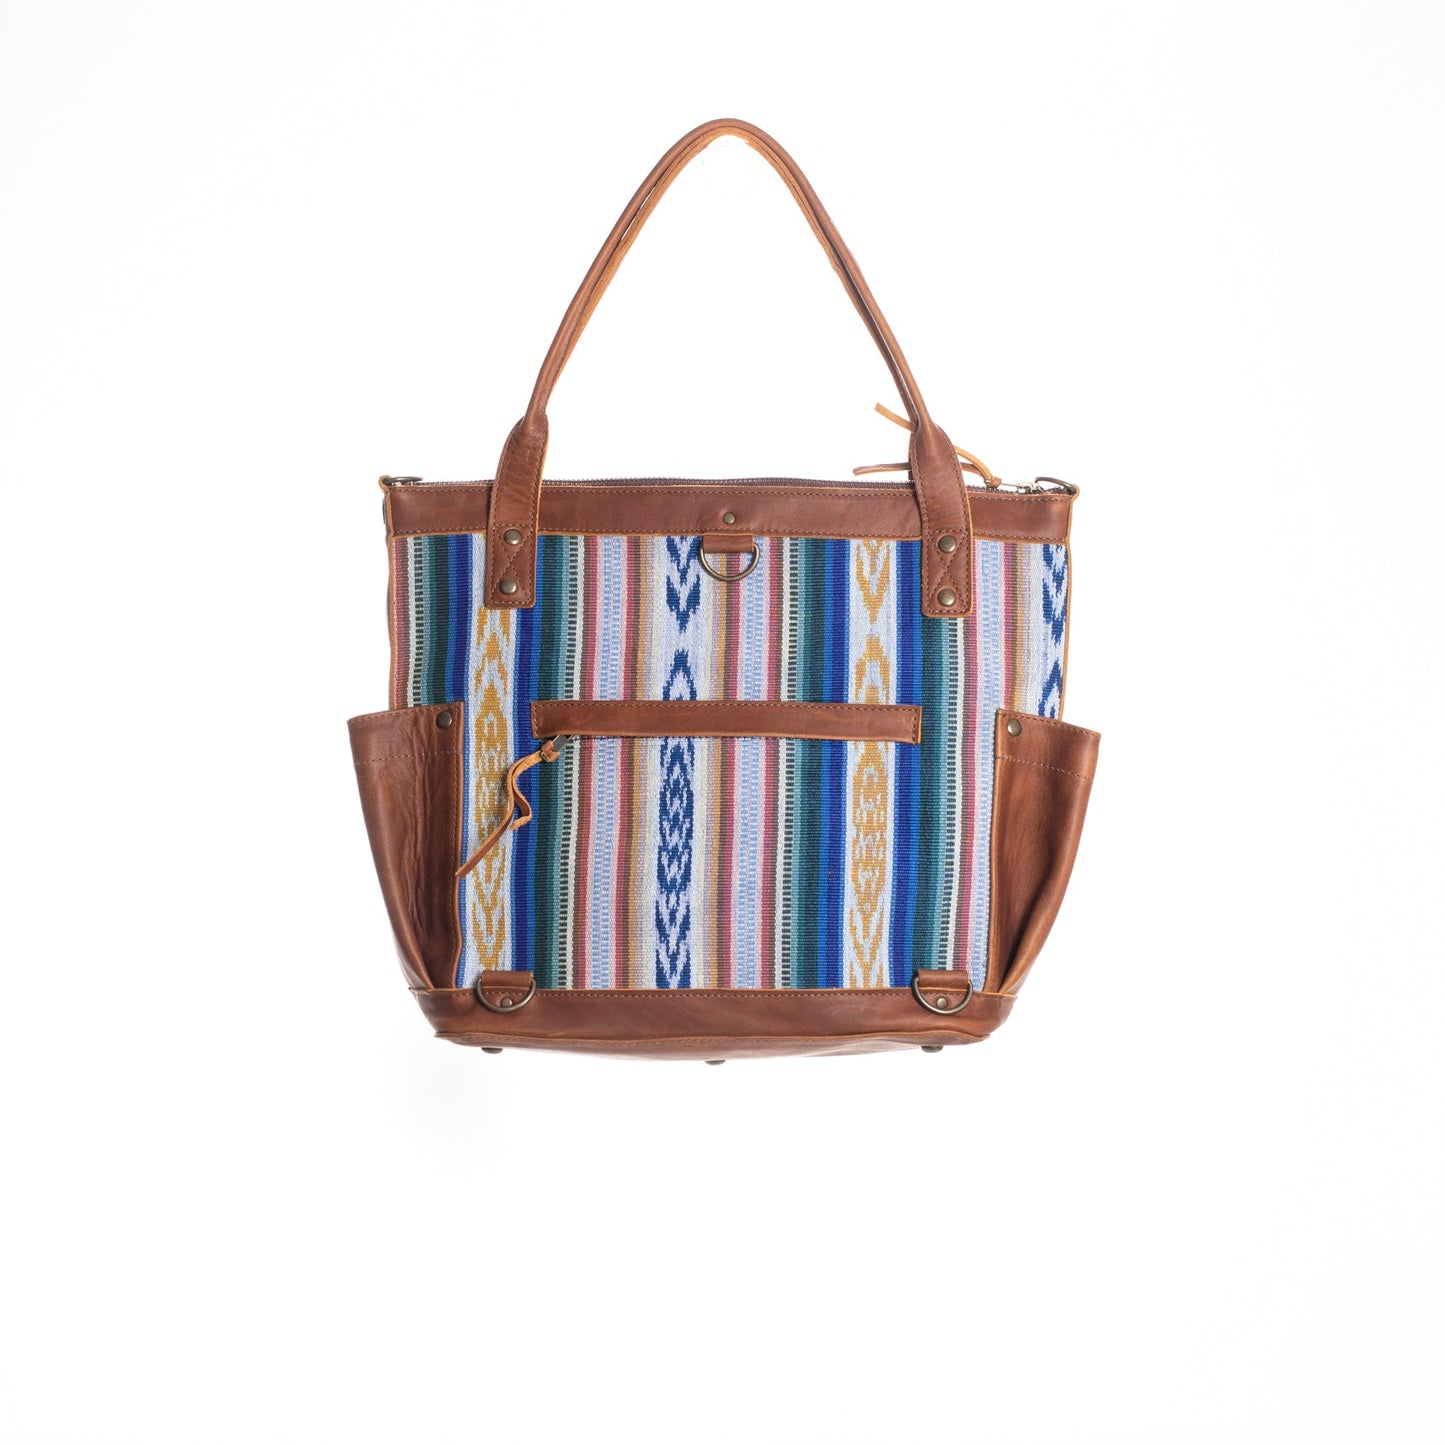 THE PERFECT BAG FULL - ARTISAN COLLECTION - DUNA AZUL - CAFE LEATHER